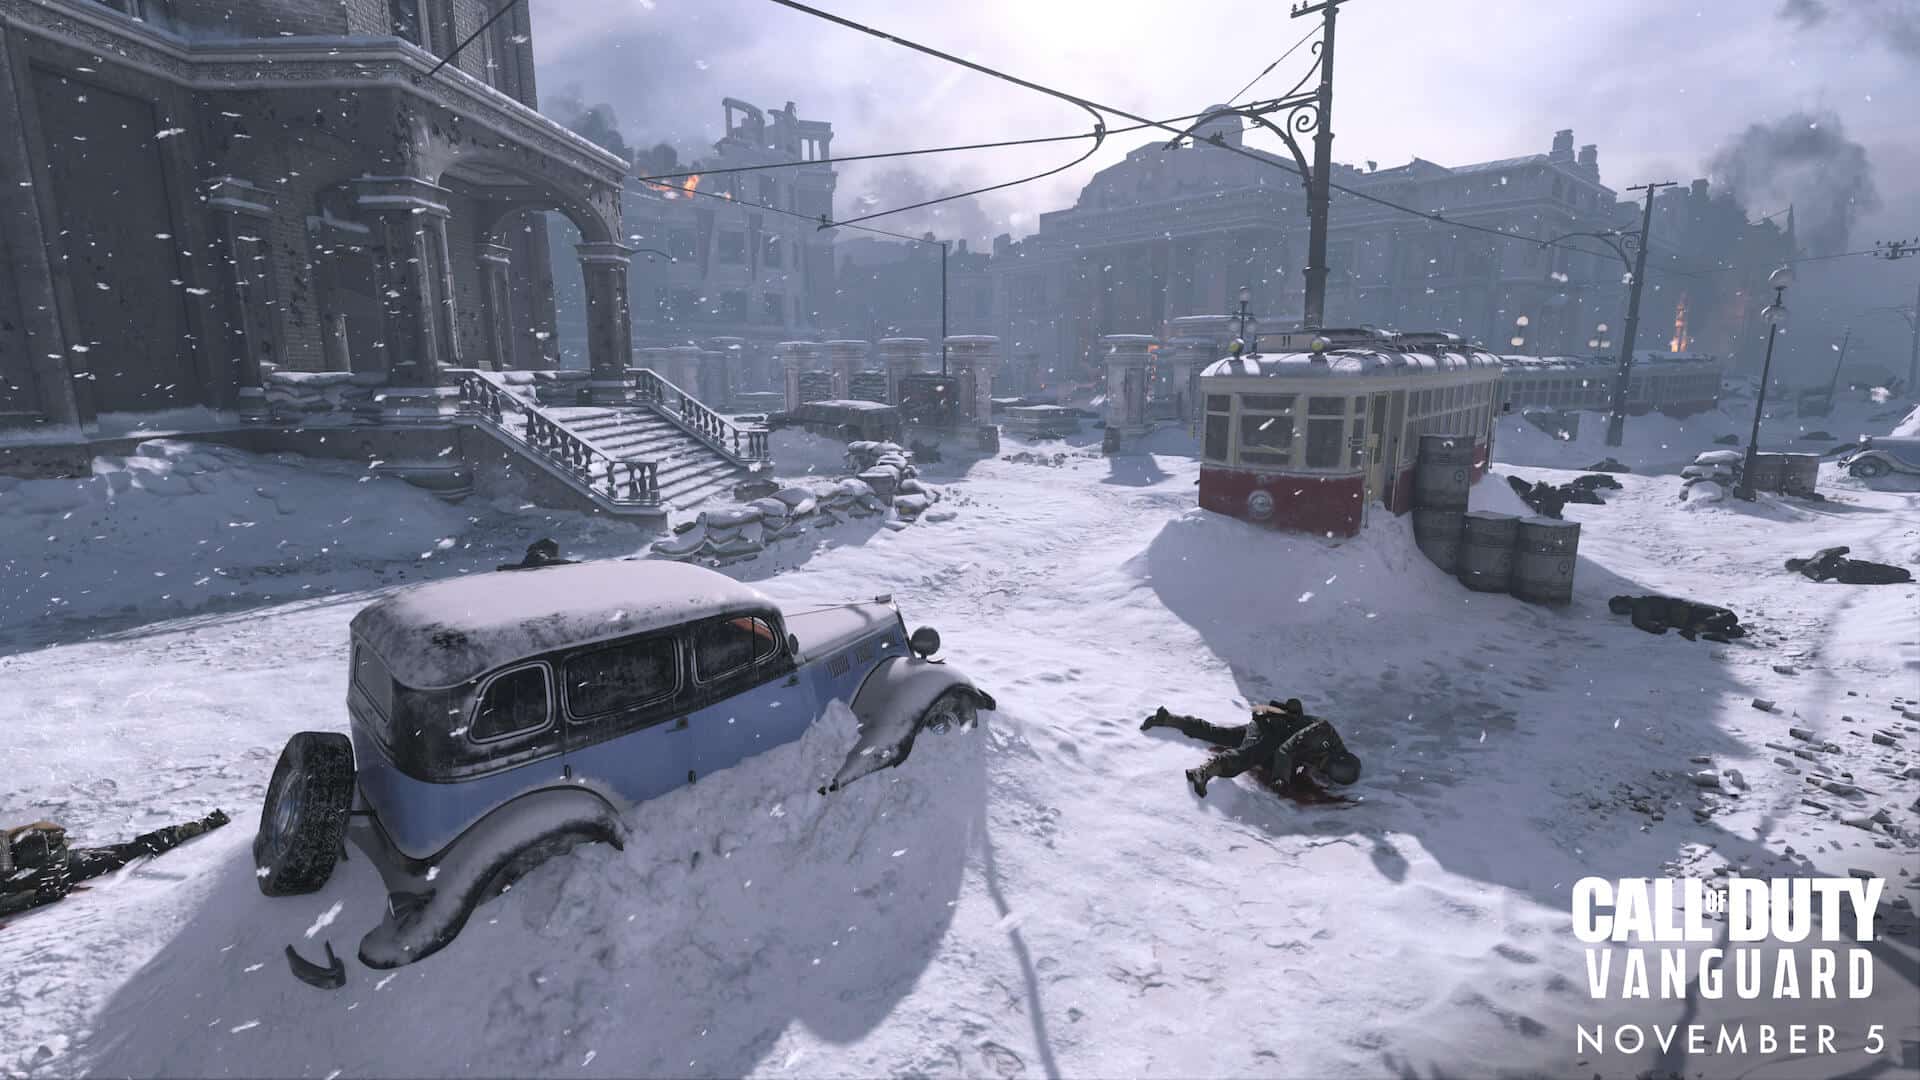 CoD: Vanguard Multiplayer maps will feature major weather effects